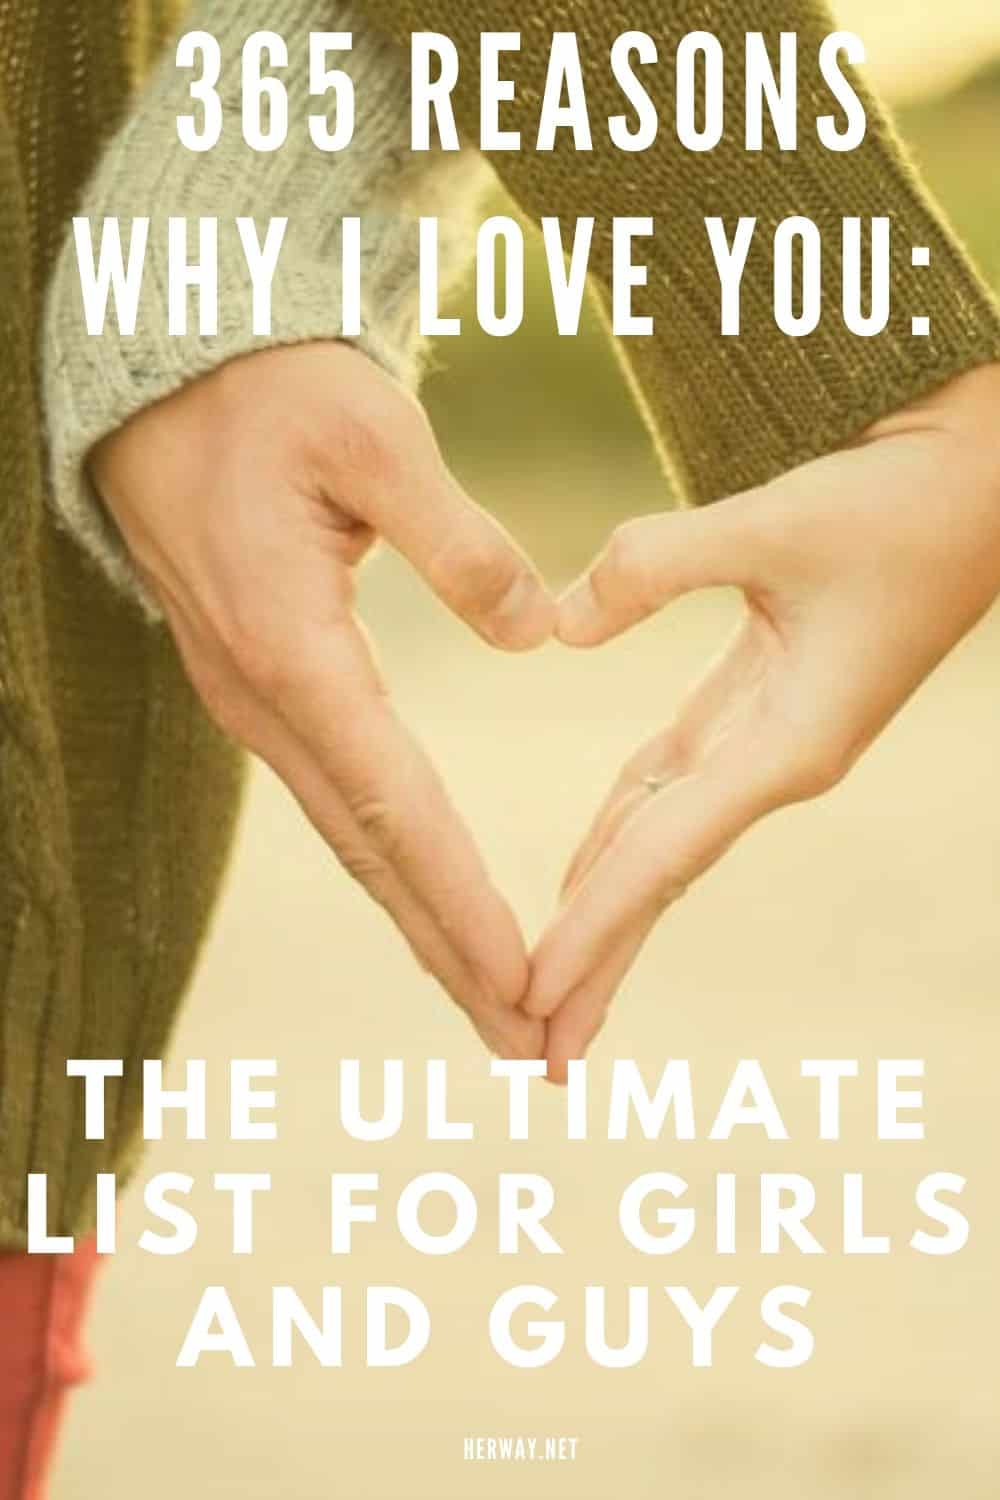 365 Reasons Why I Love You: The Ultimate List For Girls And Guys pinterest